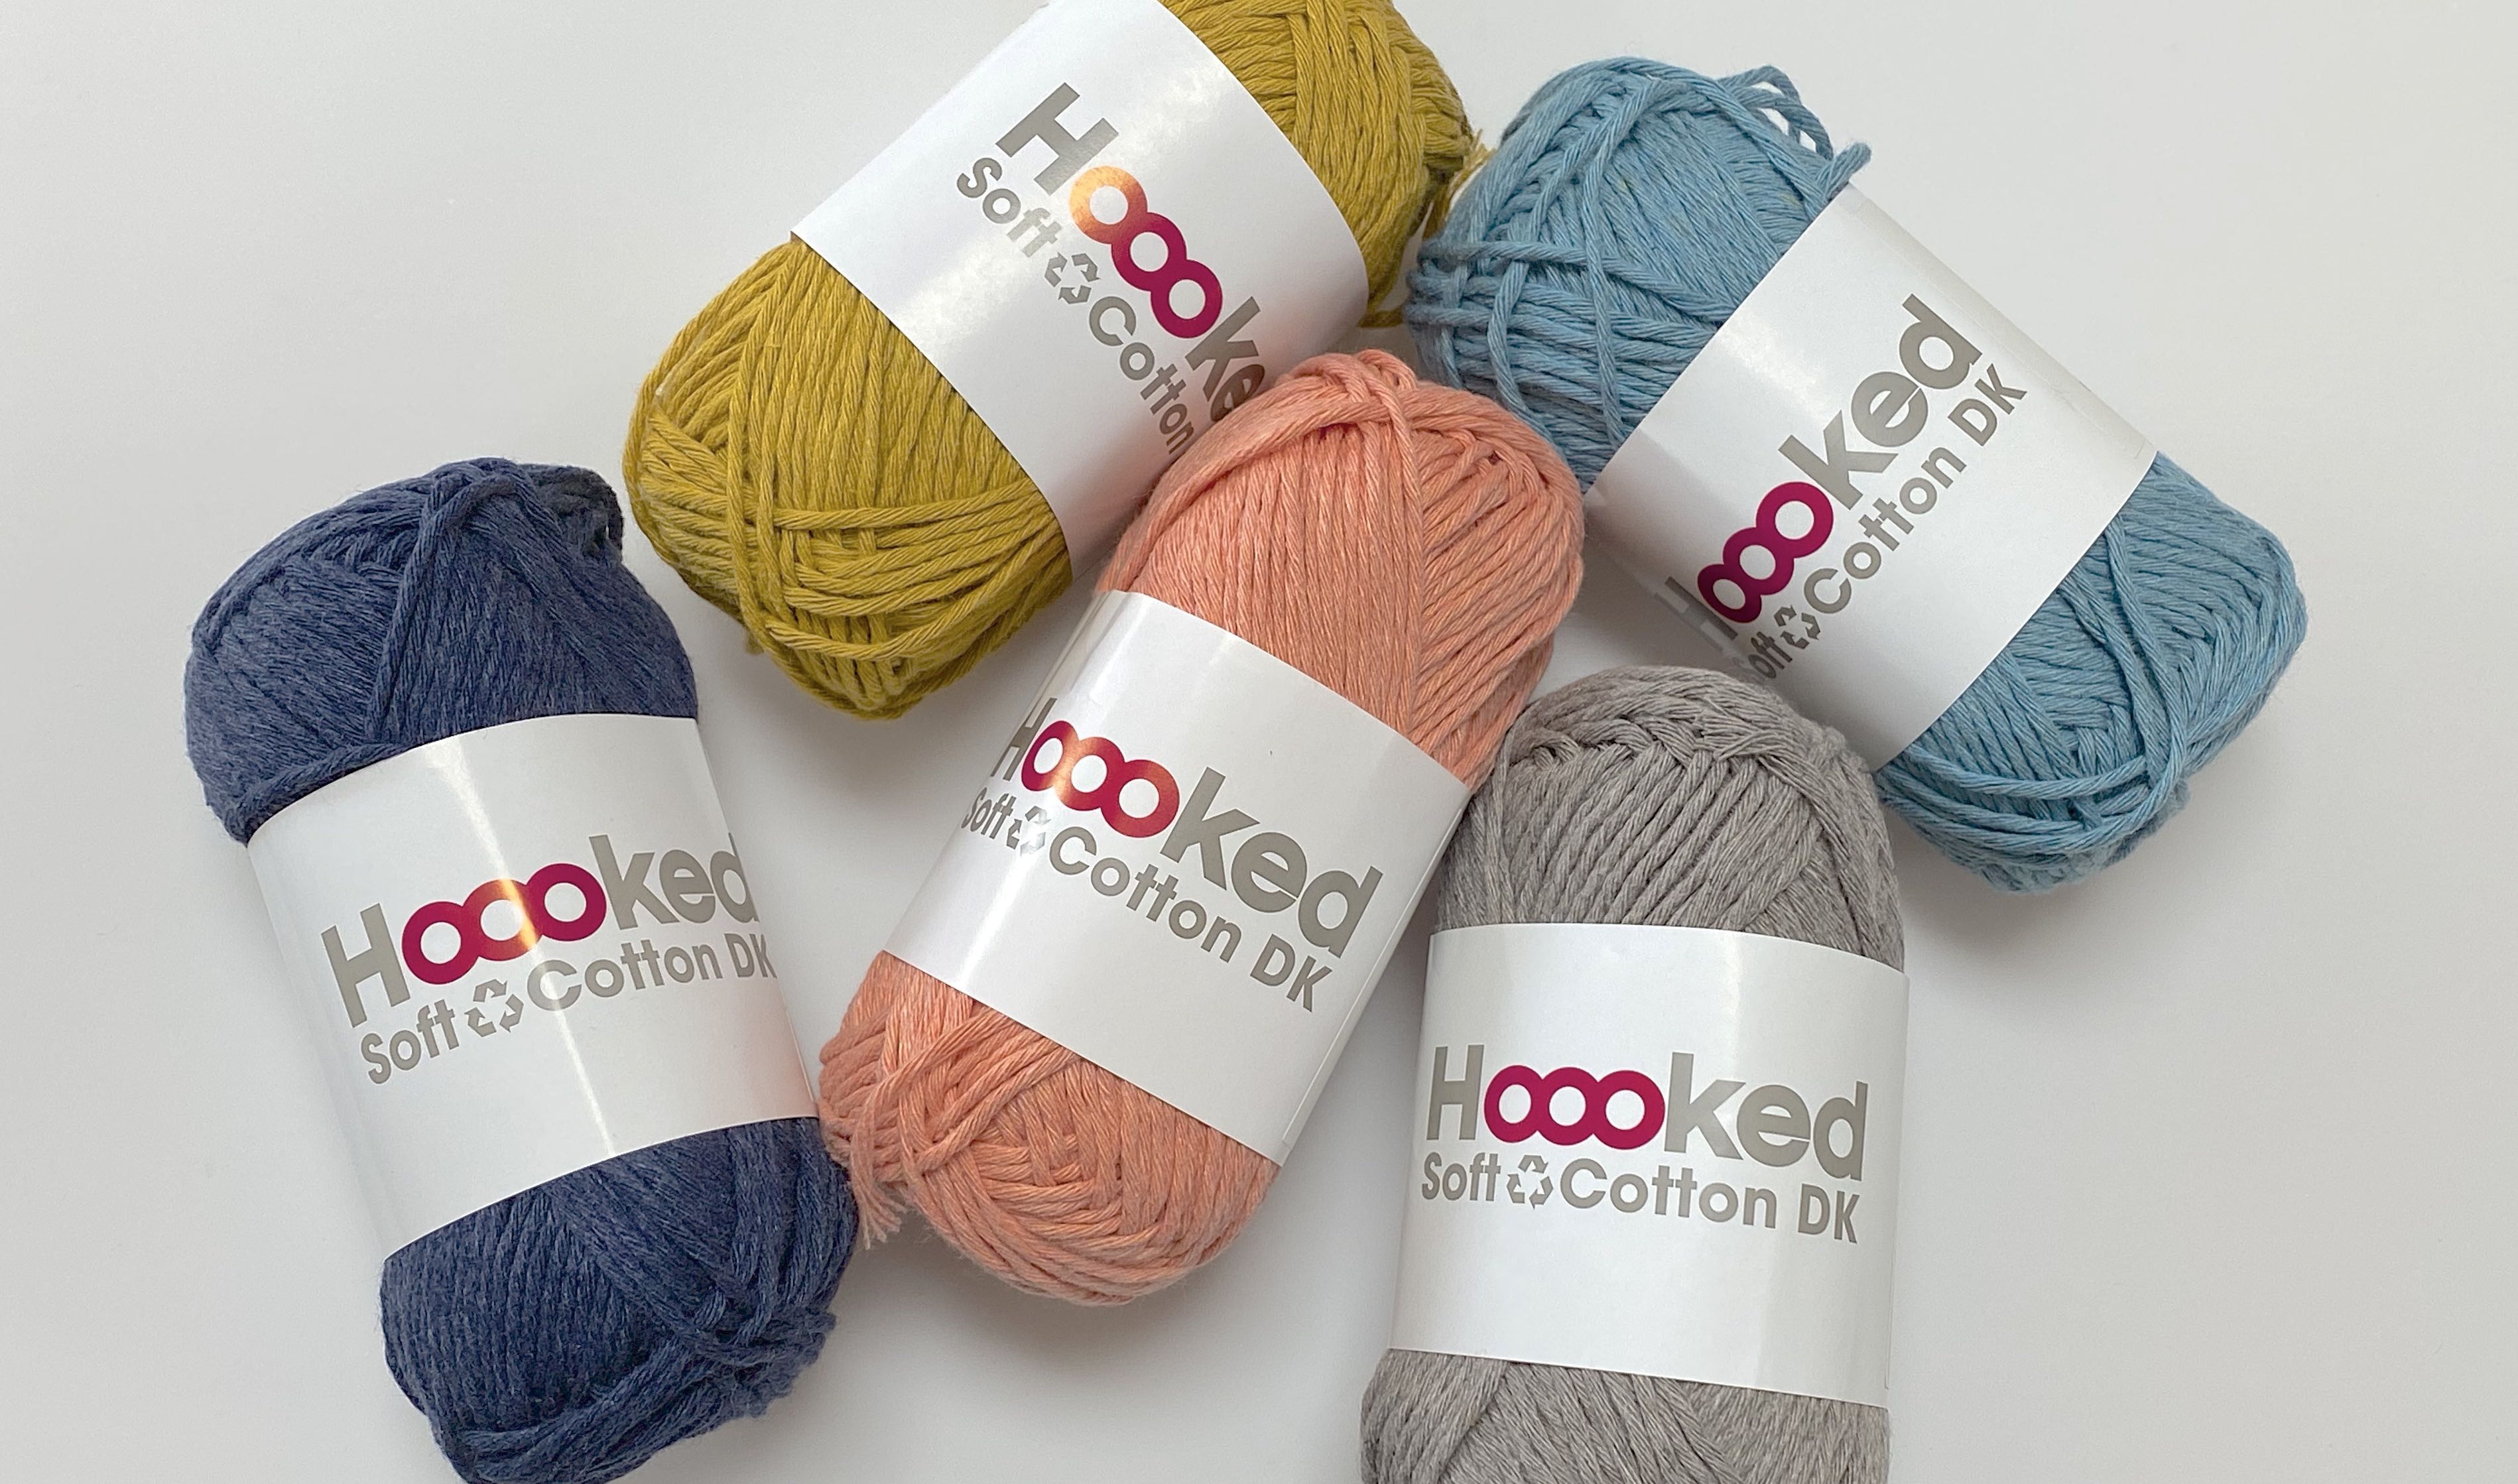 Shop cotton yarn for knitting and crochet